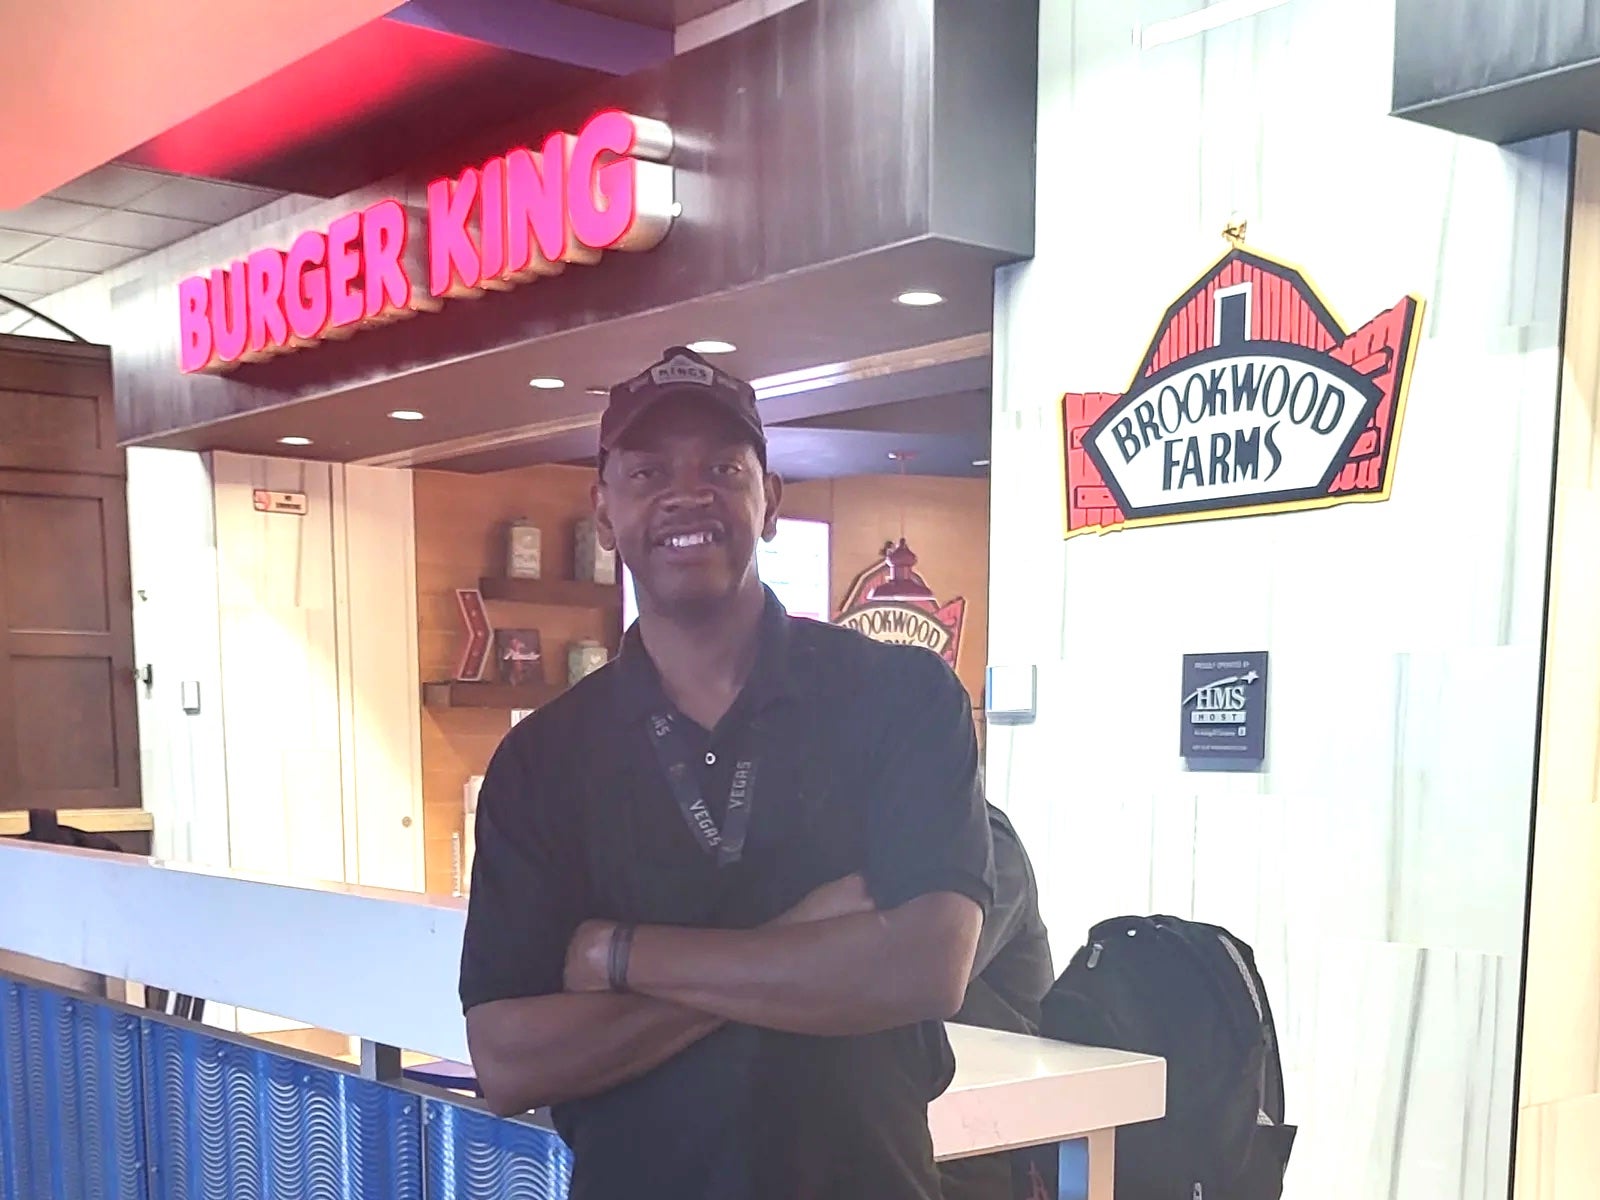 Burger King Gave A ‘Goody Bag’ To Employee Who Never Missed Work For 27 Years. He Raised $400K Thanks To The Internet